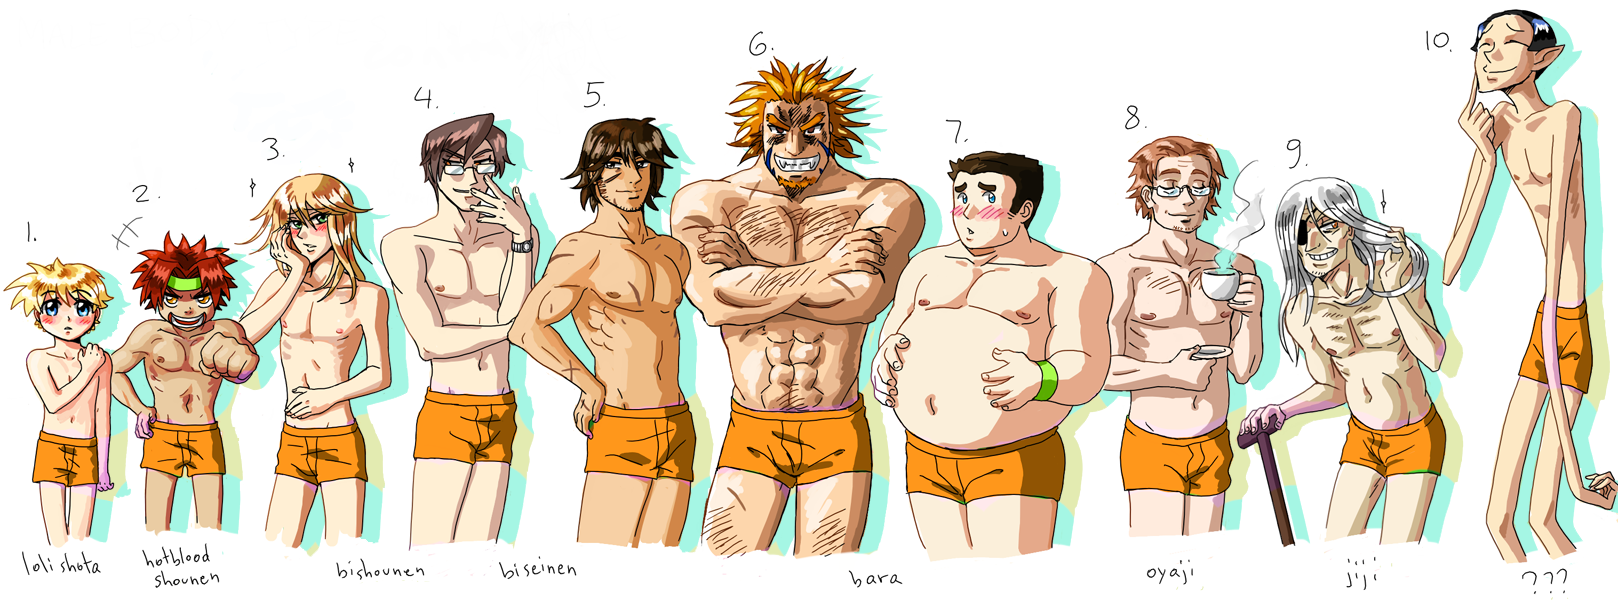 male_body_types_by_ralling